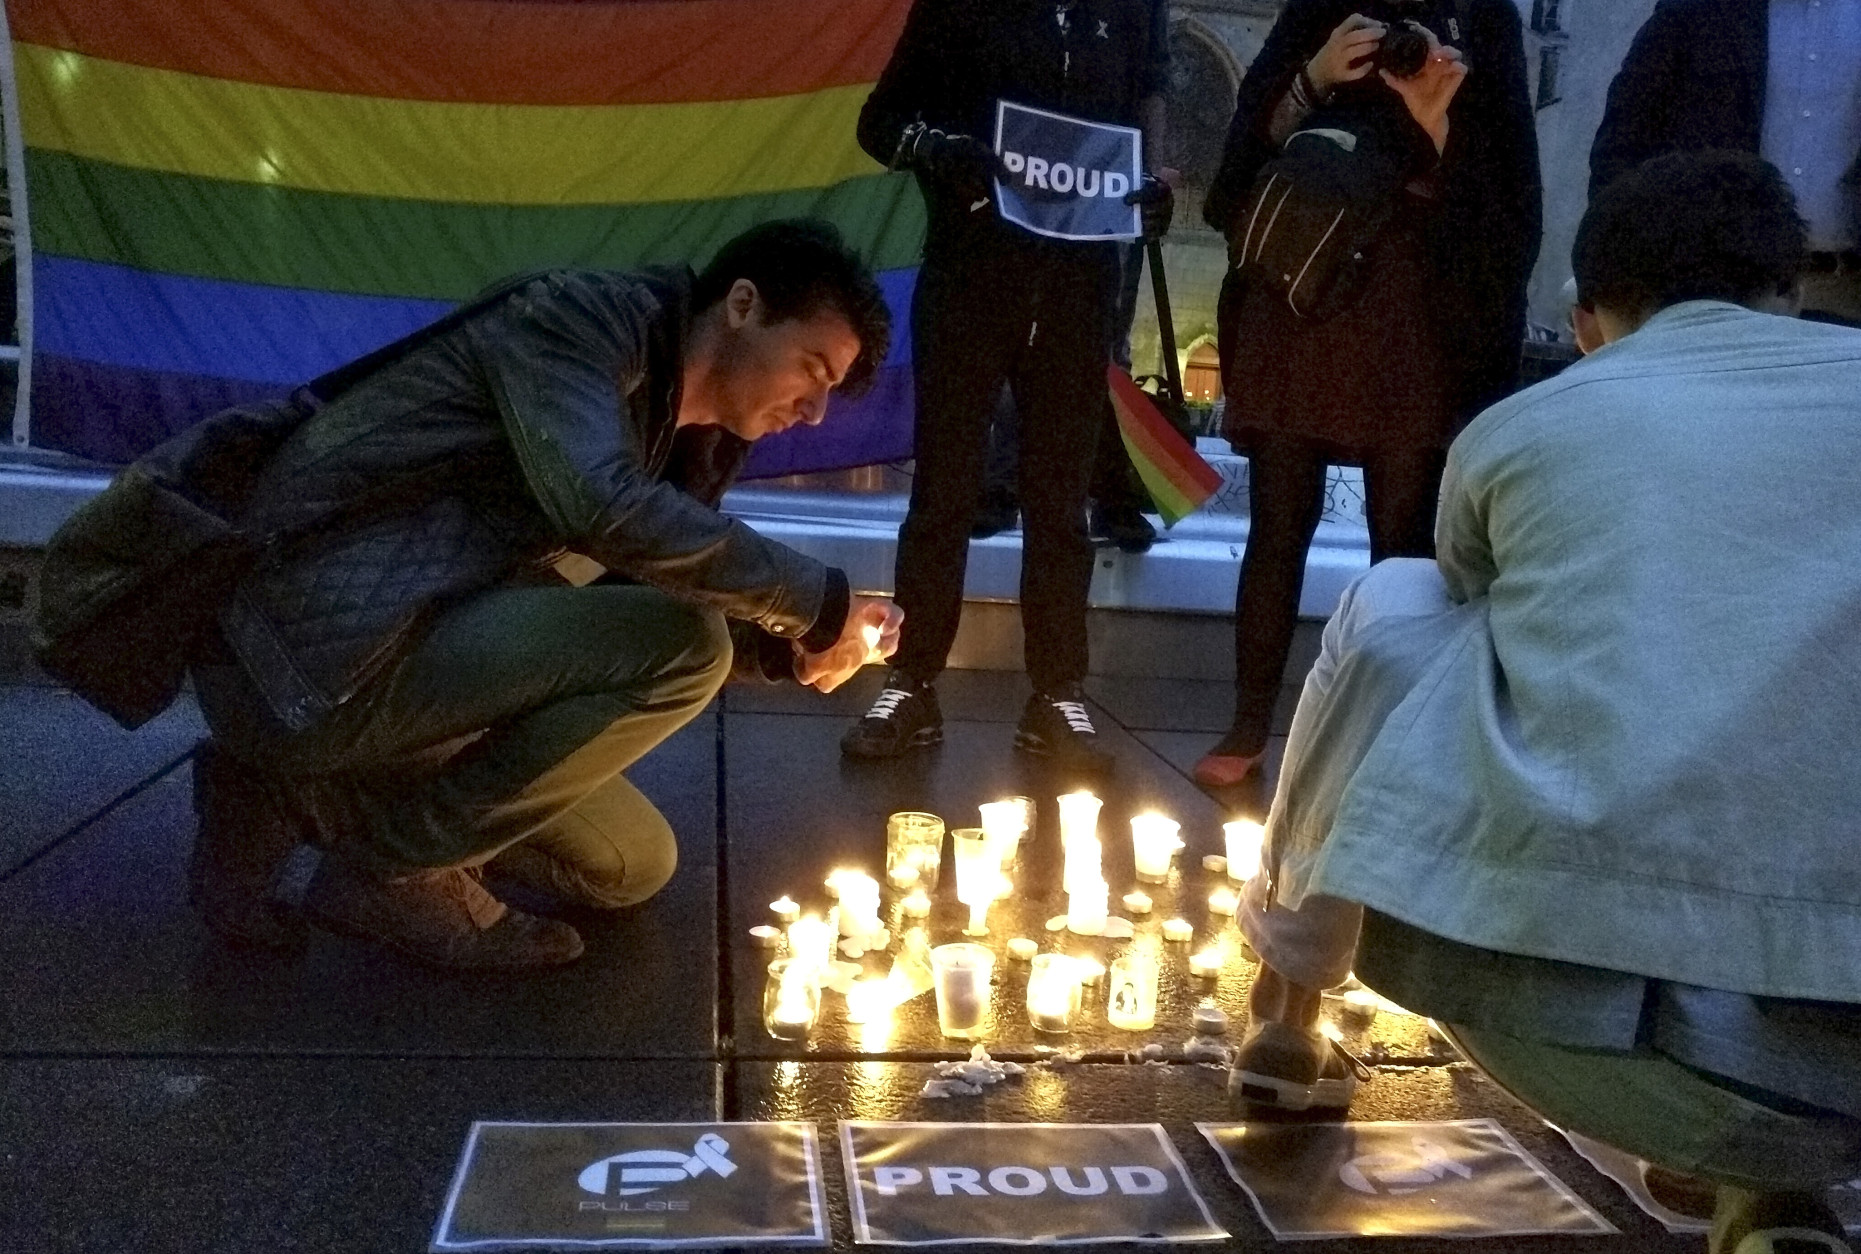 A man lights a candle during a spontaneous  vigil to remember those slain and wounded at an Orlando nightclub, Sunday June 12, 2016 in Paris. Several people were draped in rainbow flags. They lit candles and took pictures as a person in head-to-toe fetish gear held up a sign saying "Proud." (AP Photo/Raphael Satter)